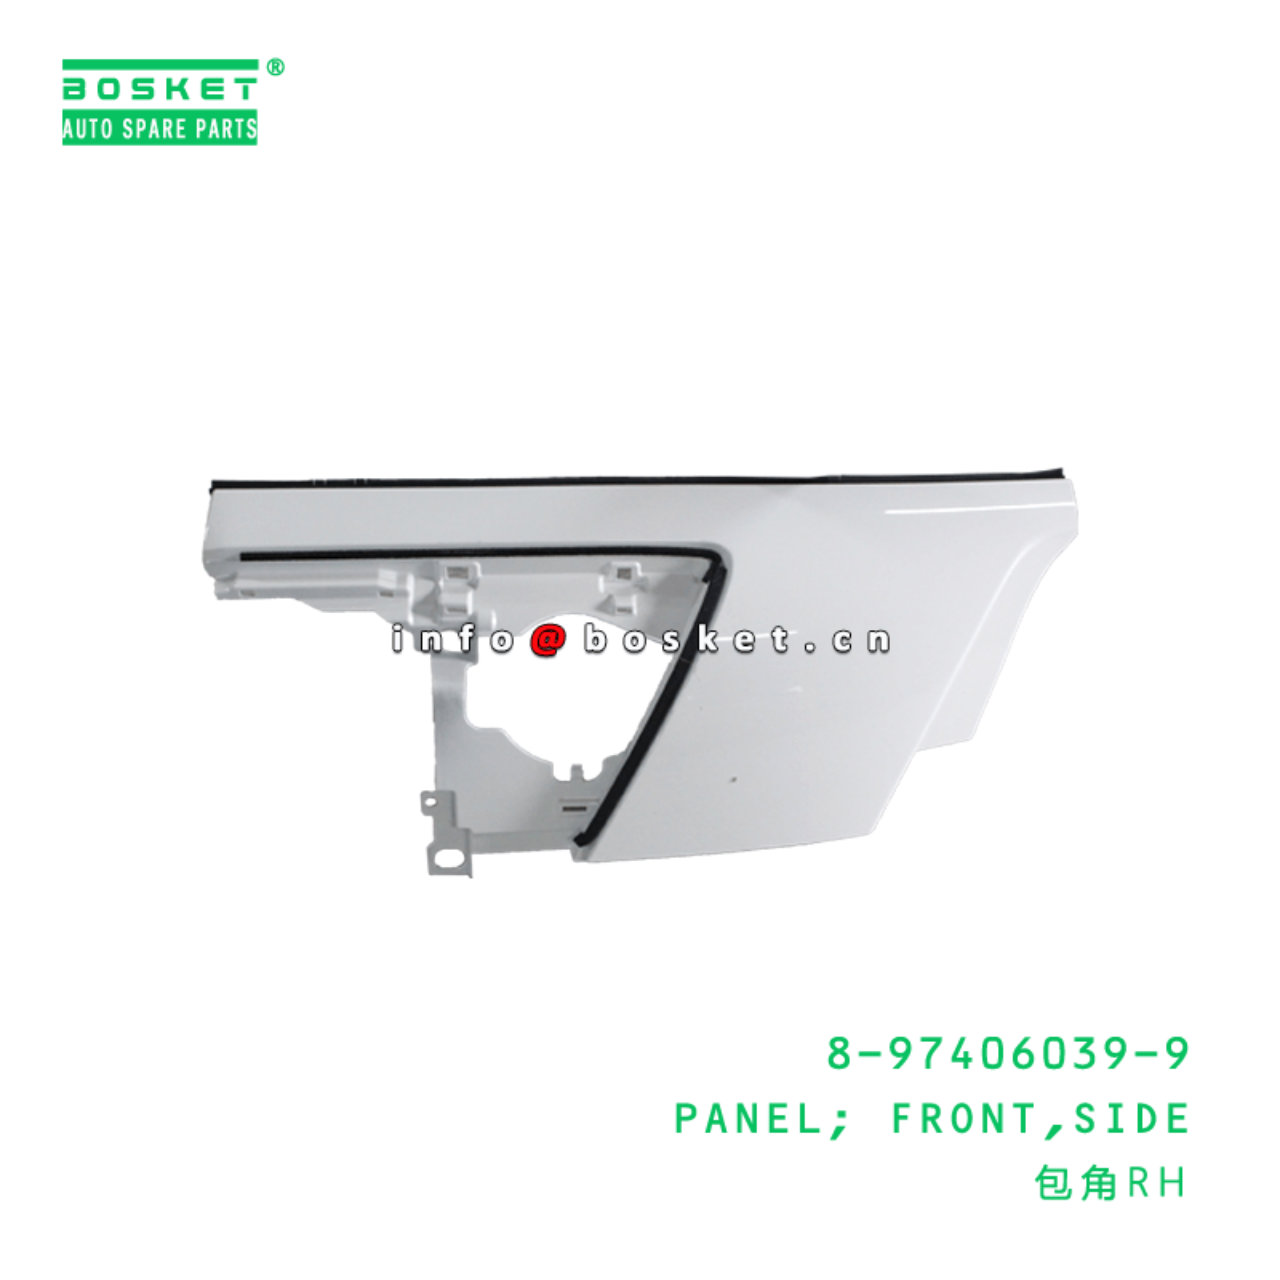  8-97406039-9 Side Front Panel 8974060399 Suitable for ISUZU 700P 